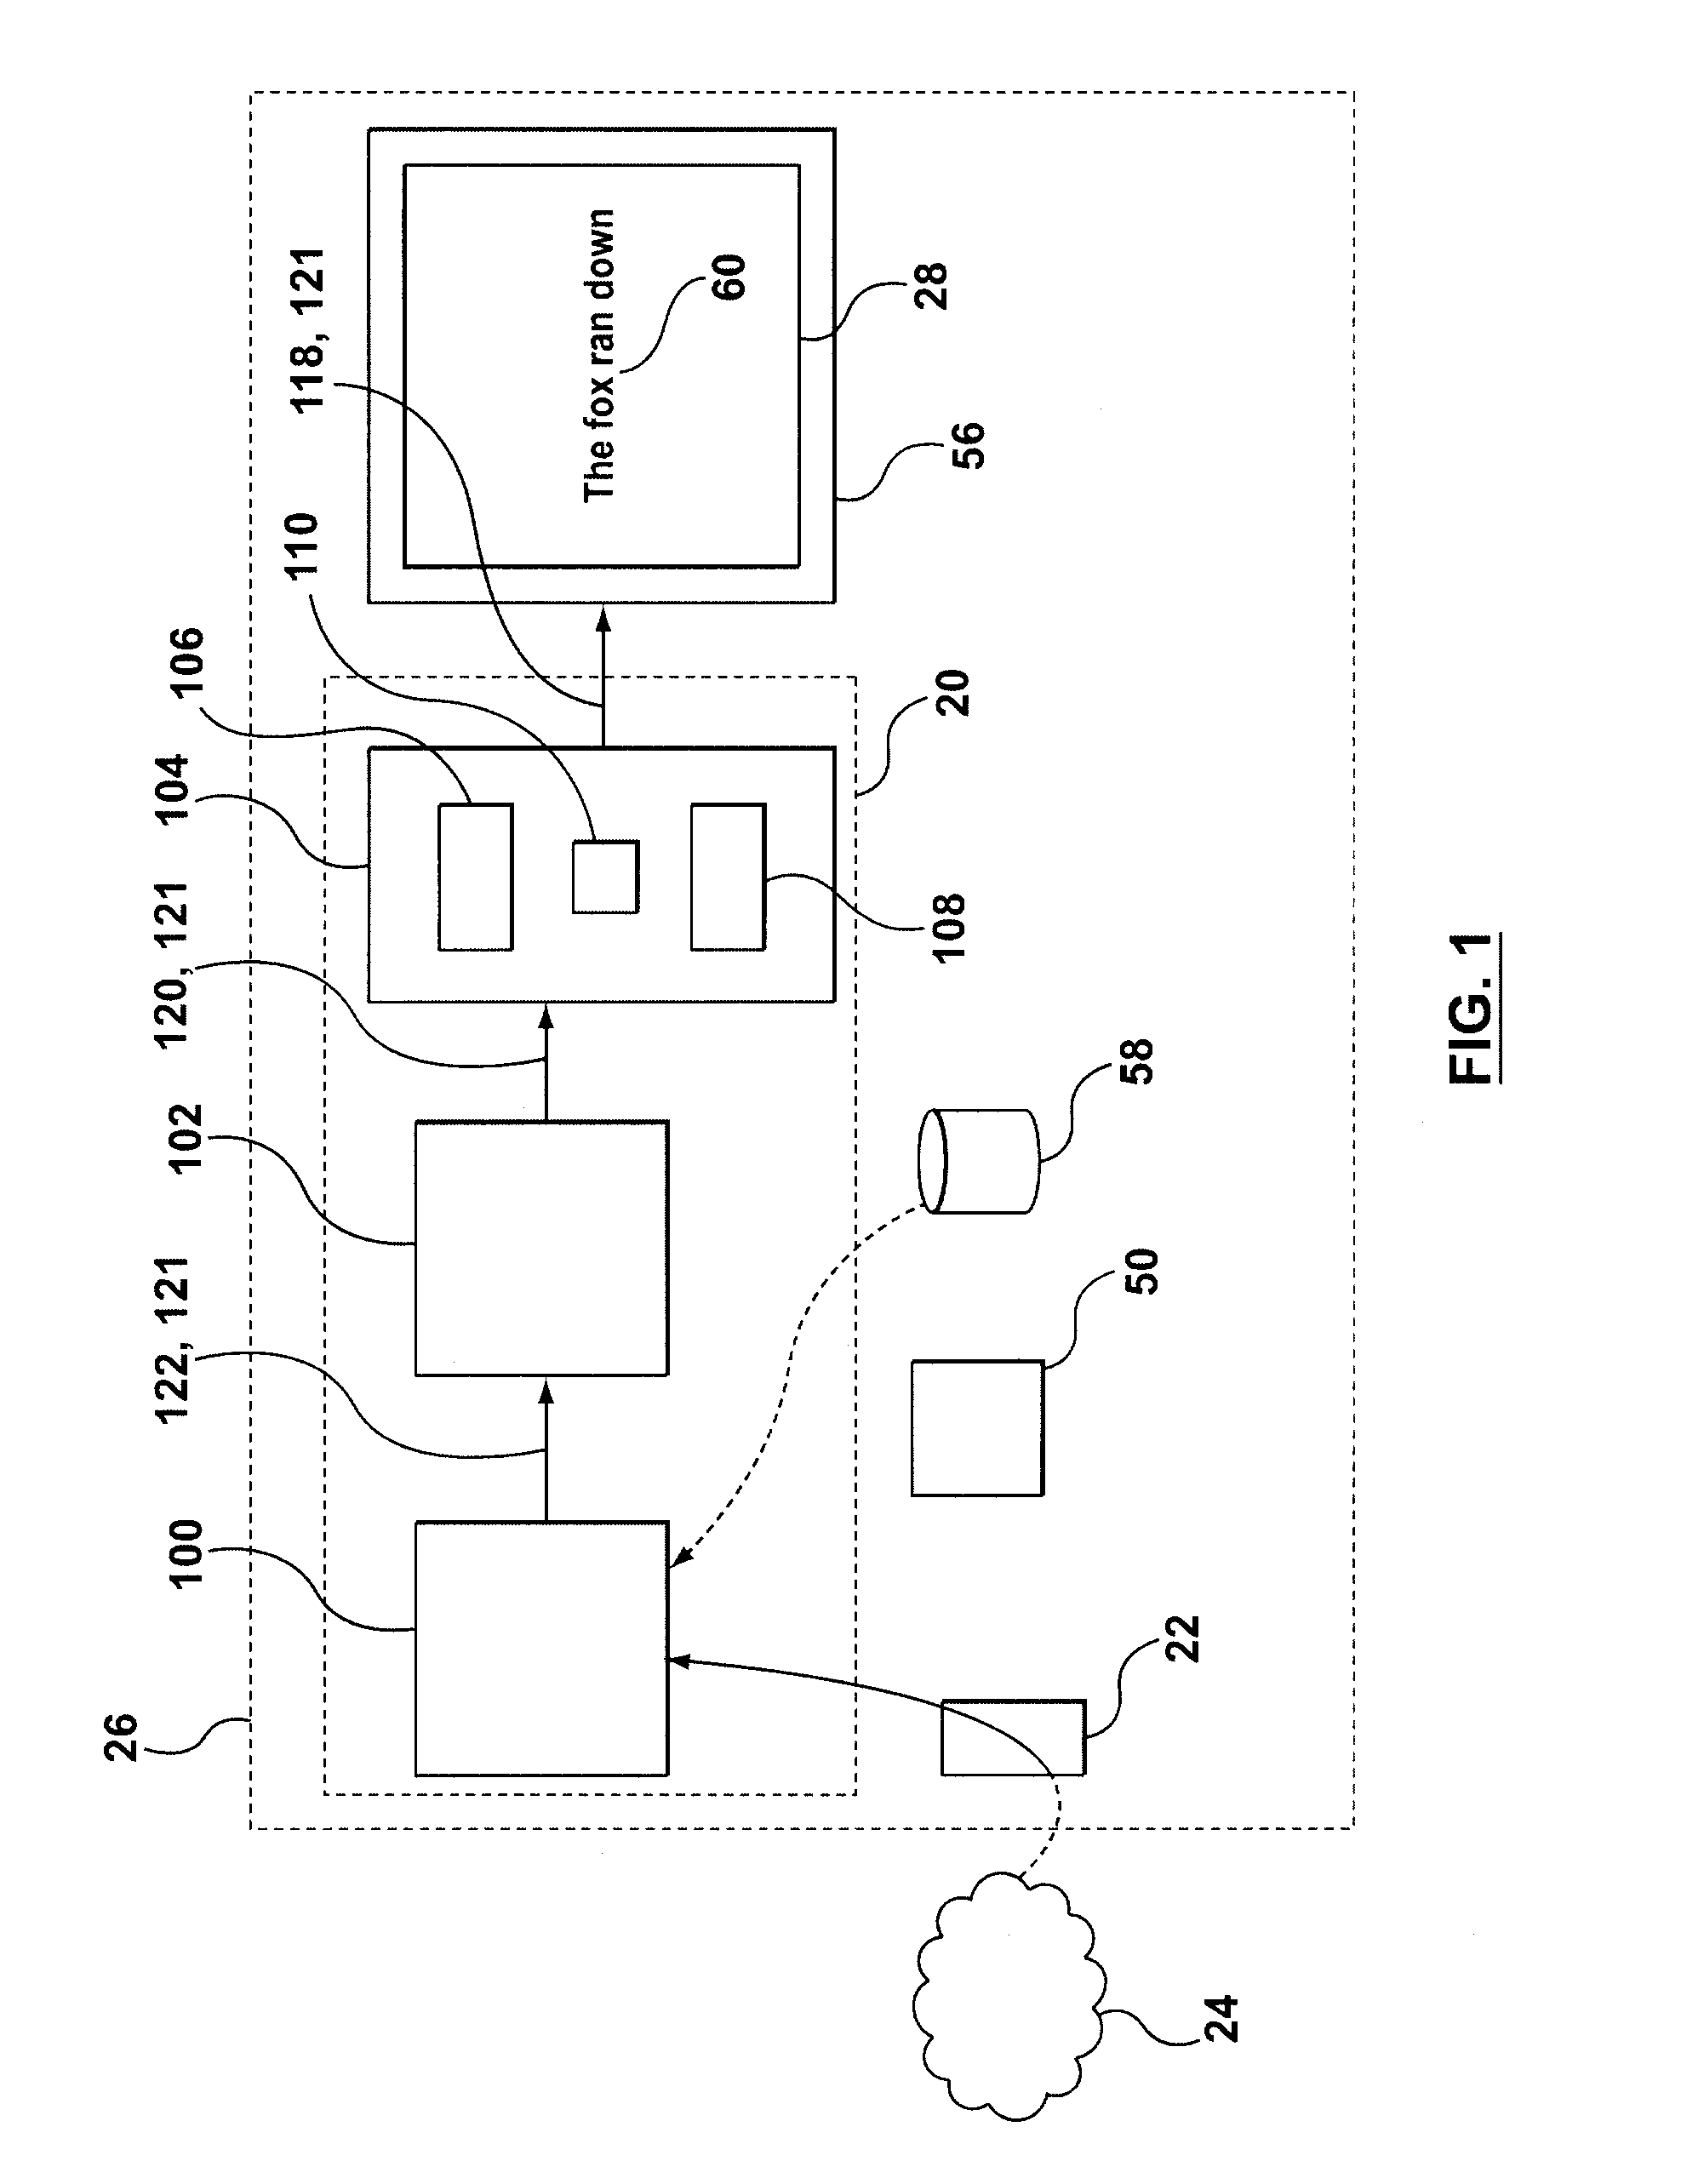 System and method for delivering content and advertisments